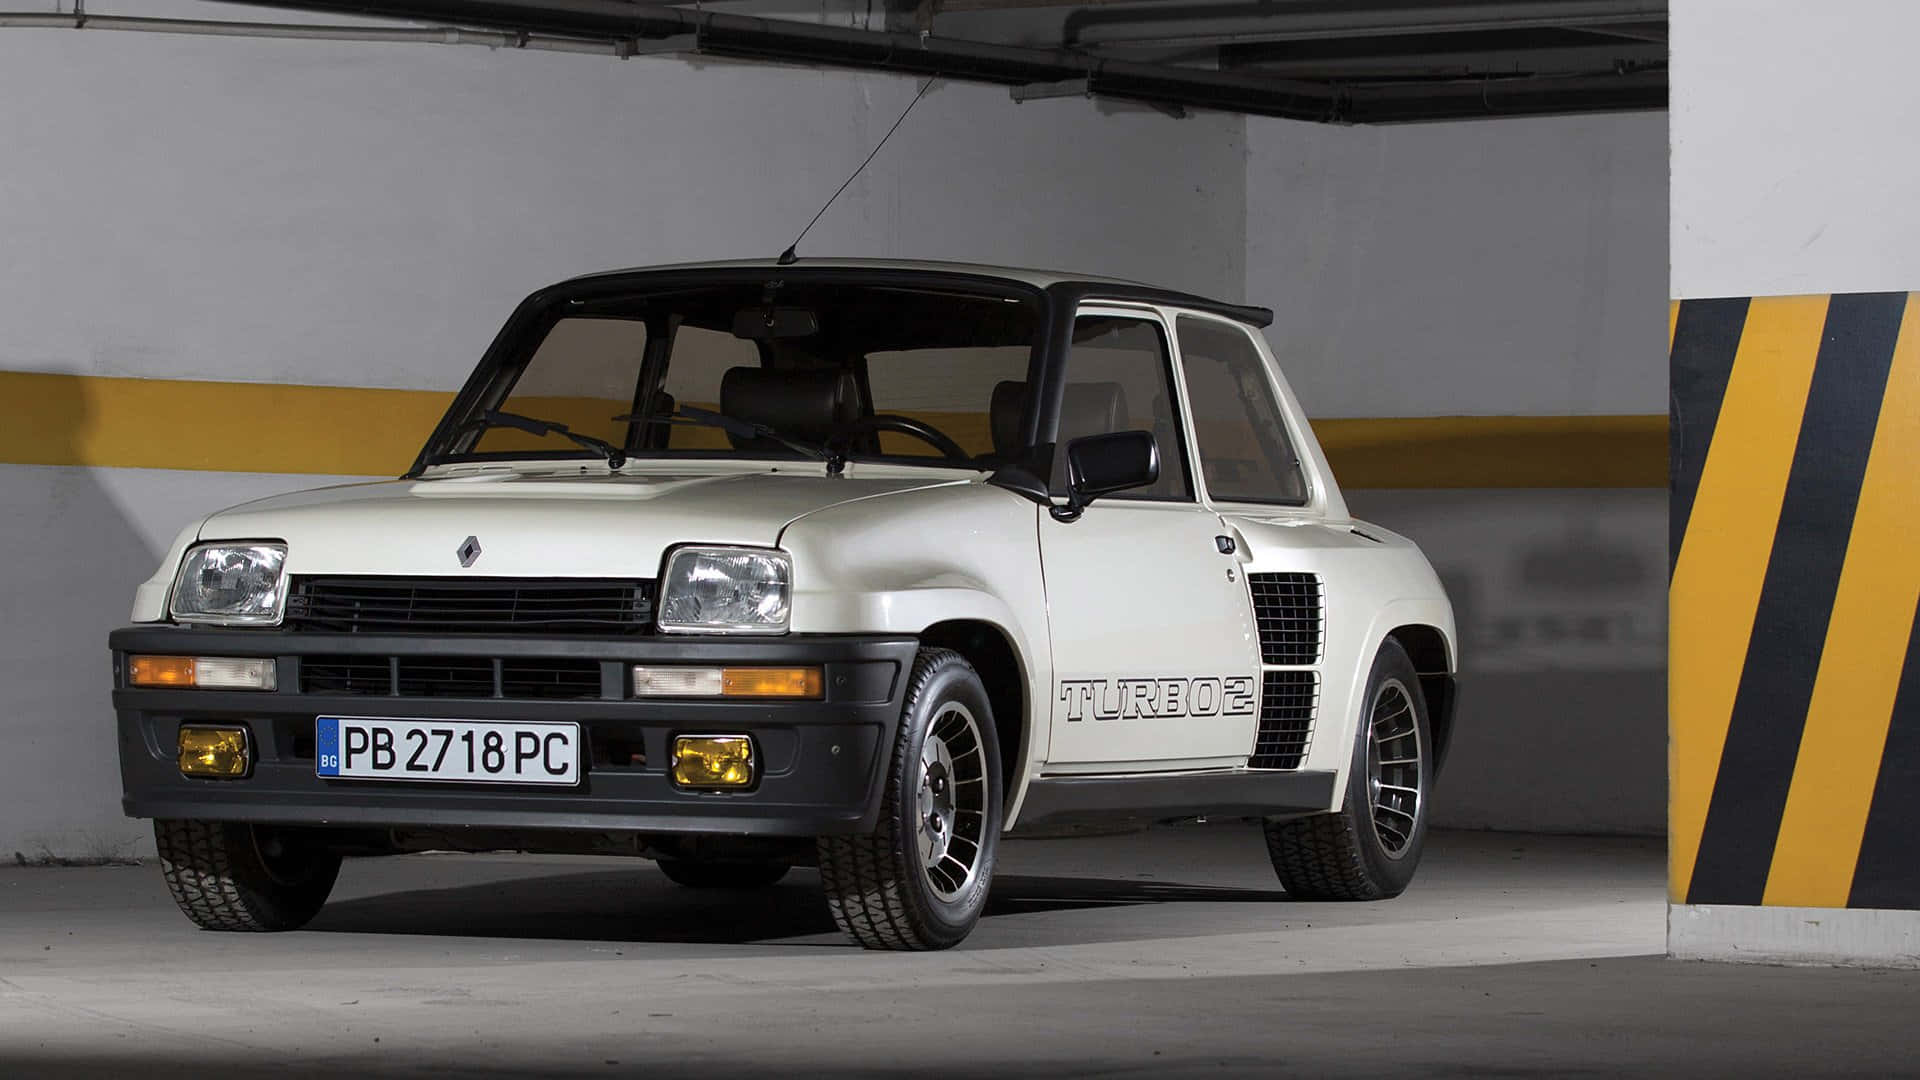 A Classic Renault 5 Turbo in Full Glory Wallpaper